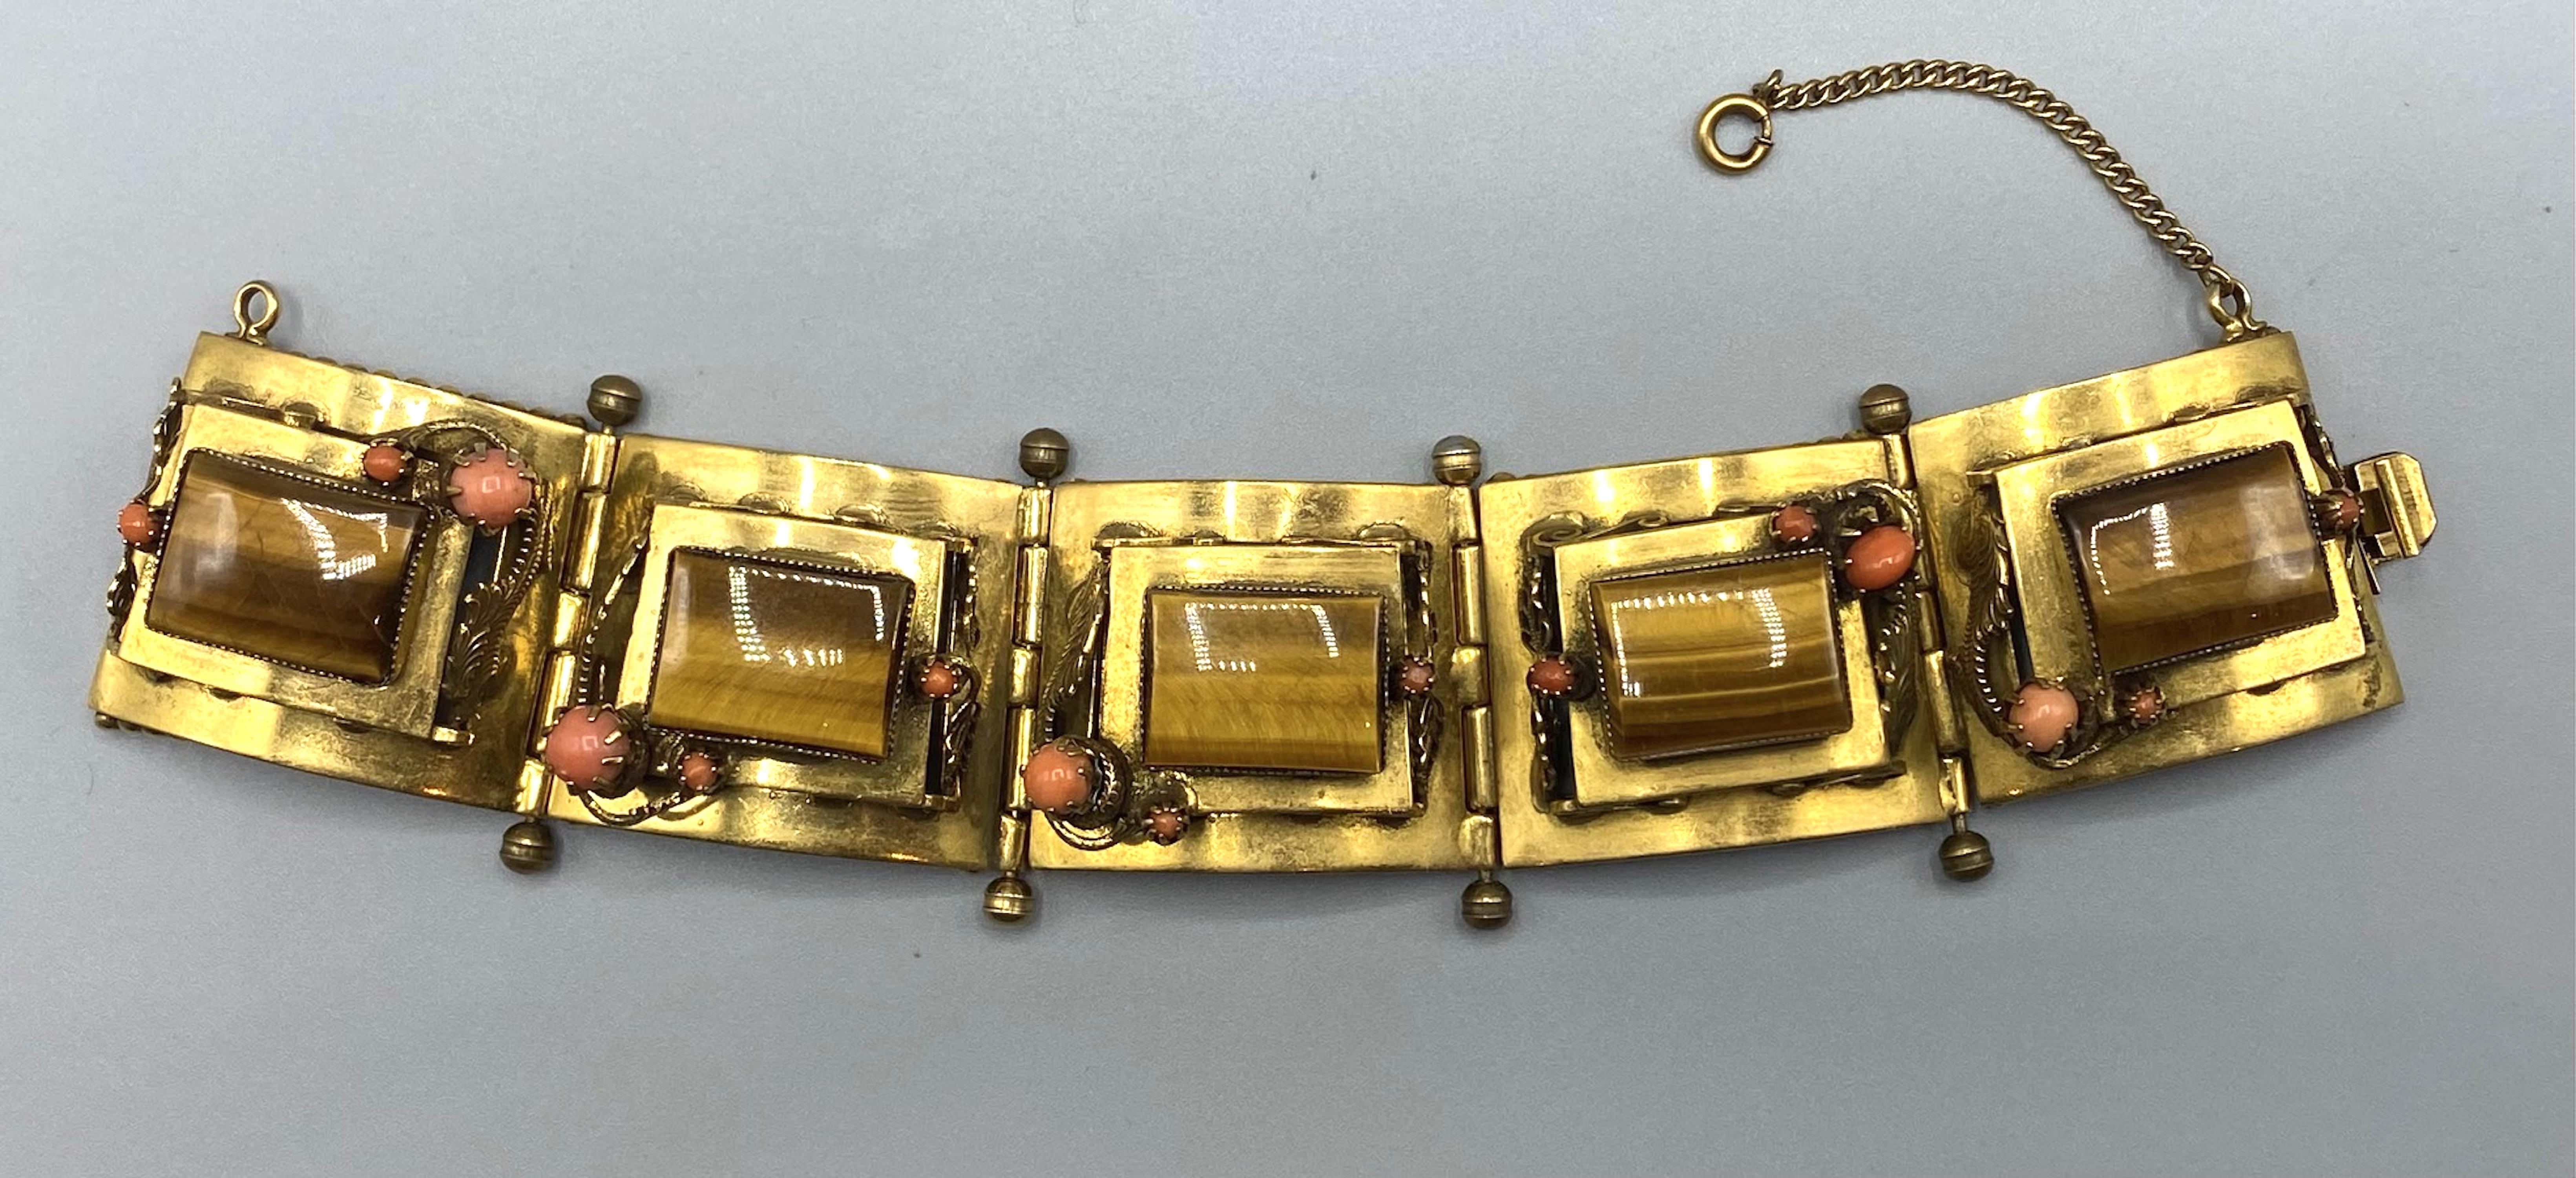 An Unique and wonderful 1940s/50s handcrafted gold plated bracelet, composed of 5 heavy panels decorated with real coral and tiger's eye.
Very elaborate and exquisitely made.